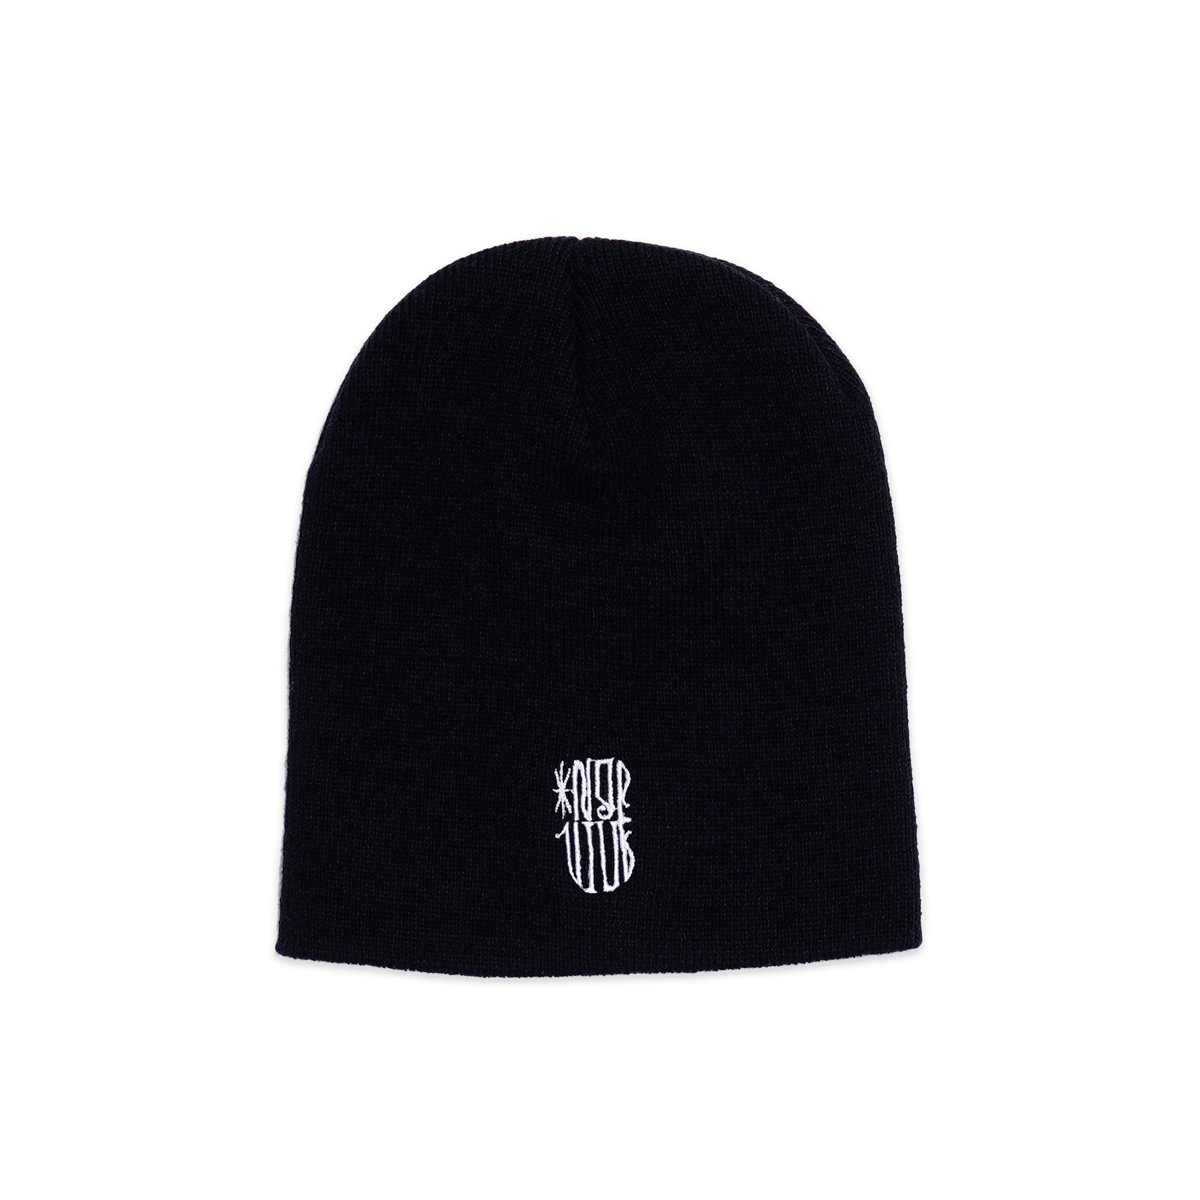 Uniques / TradeMark Beanie - Black - - HighLife Online Store 